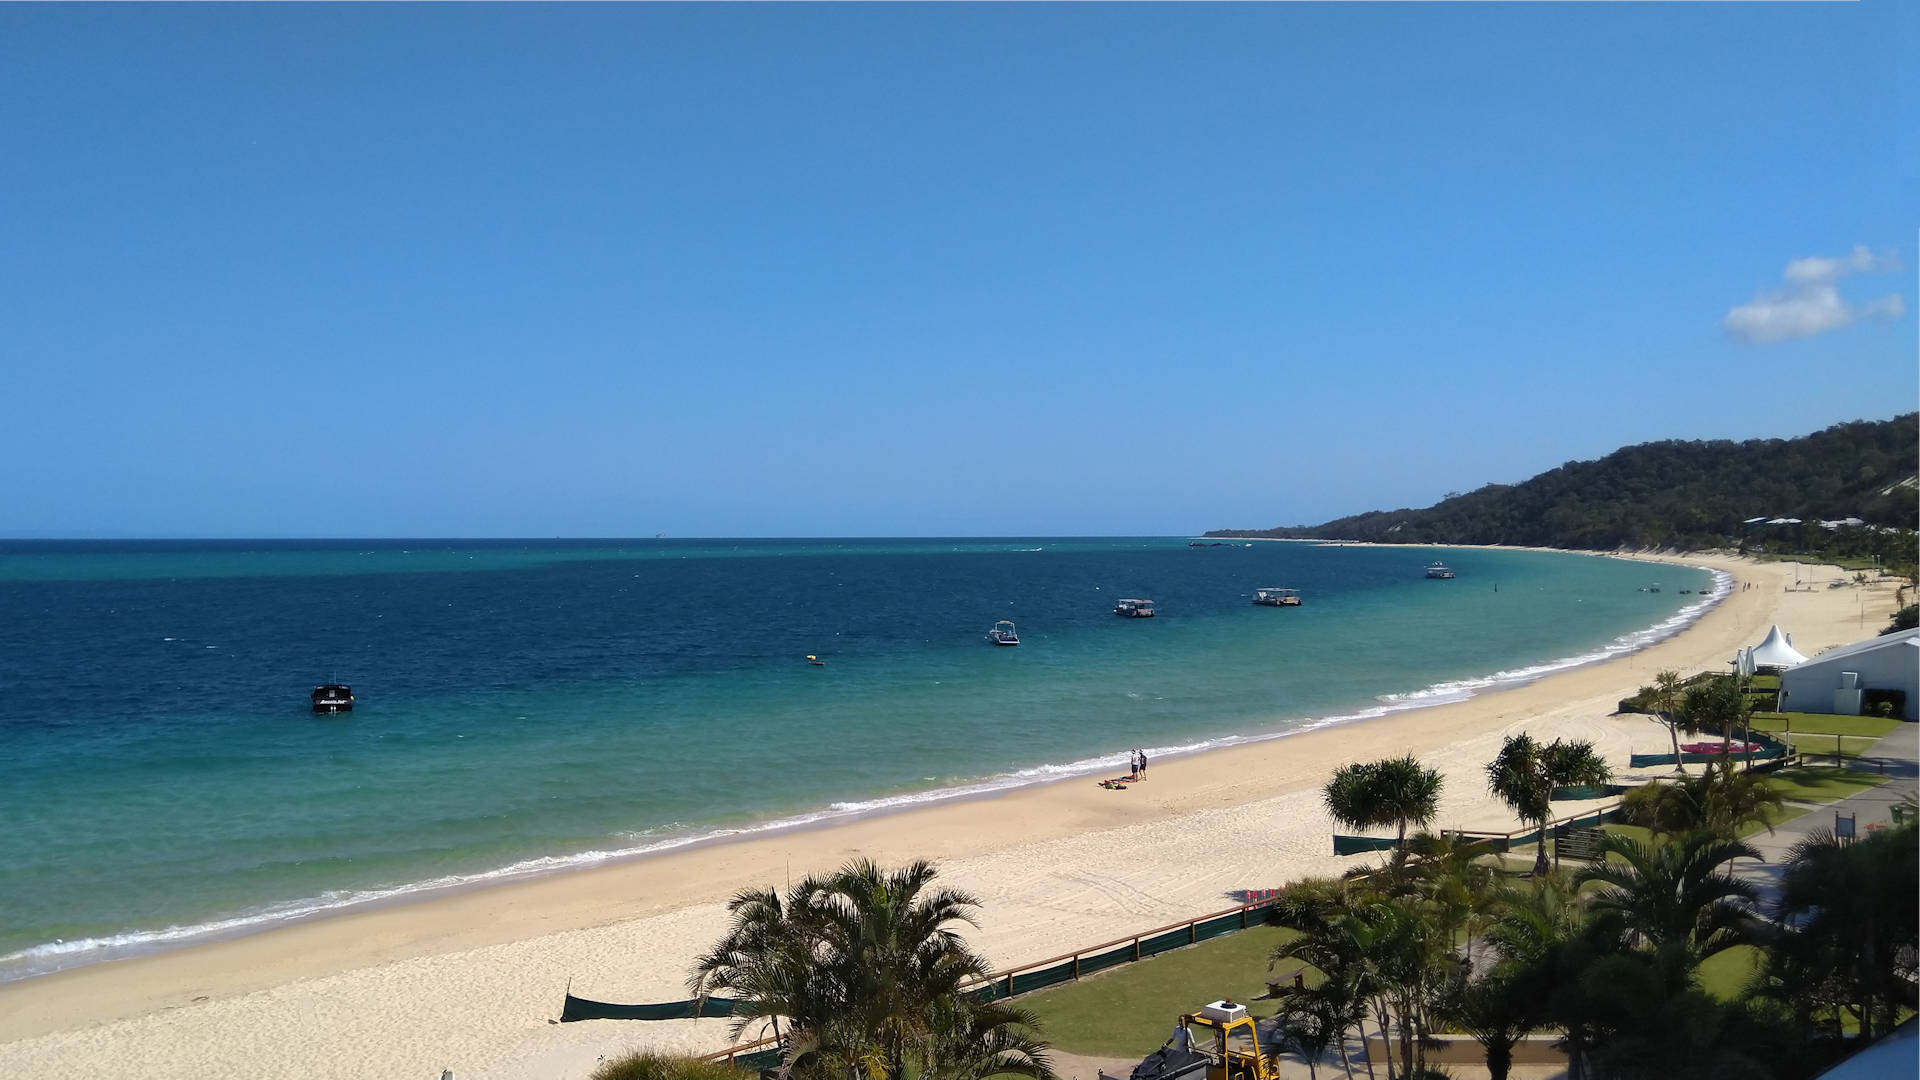 View over Tangalooma Beach on Moreton Island from an apartment near the Jetty